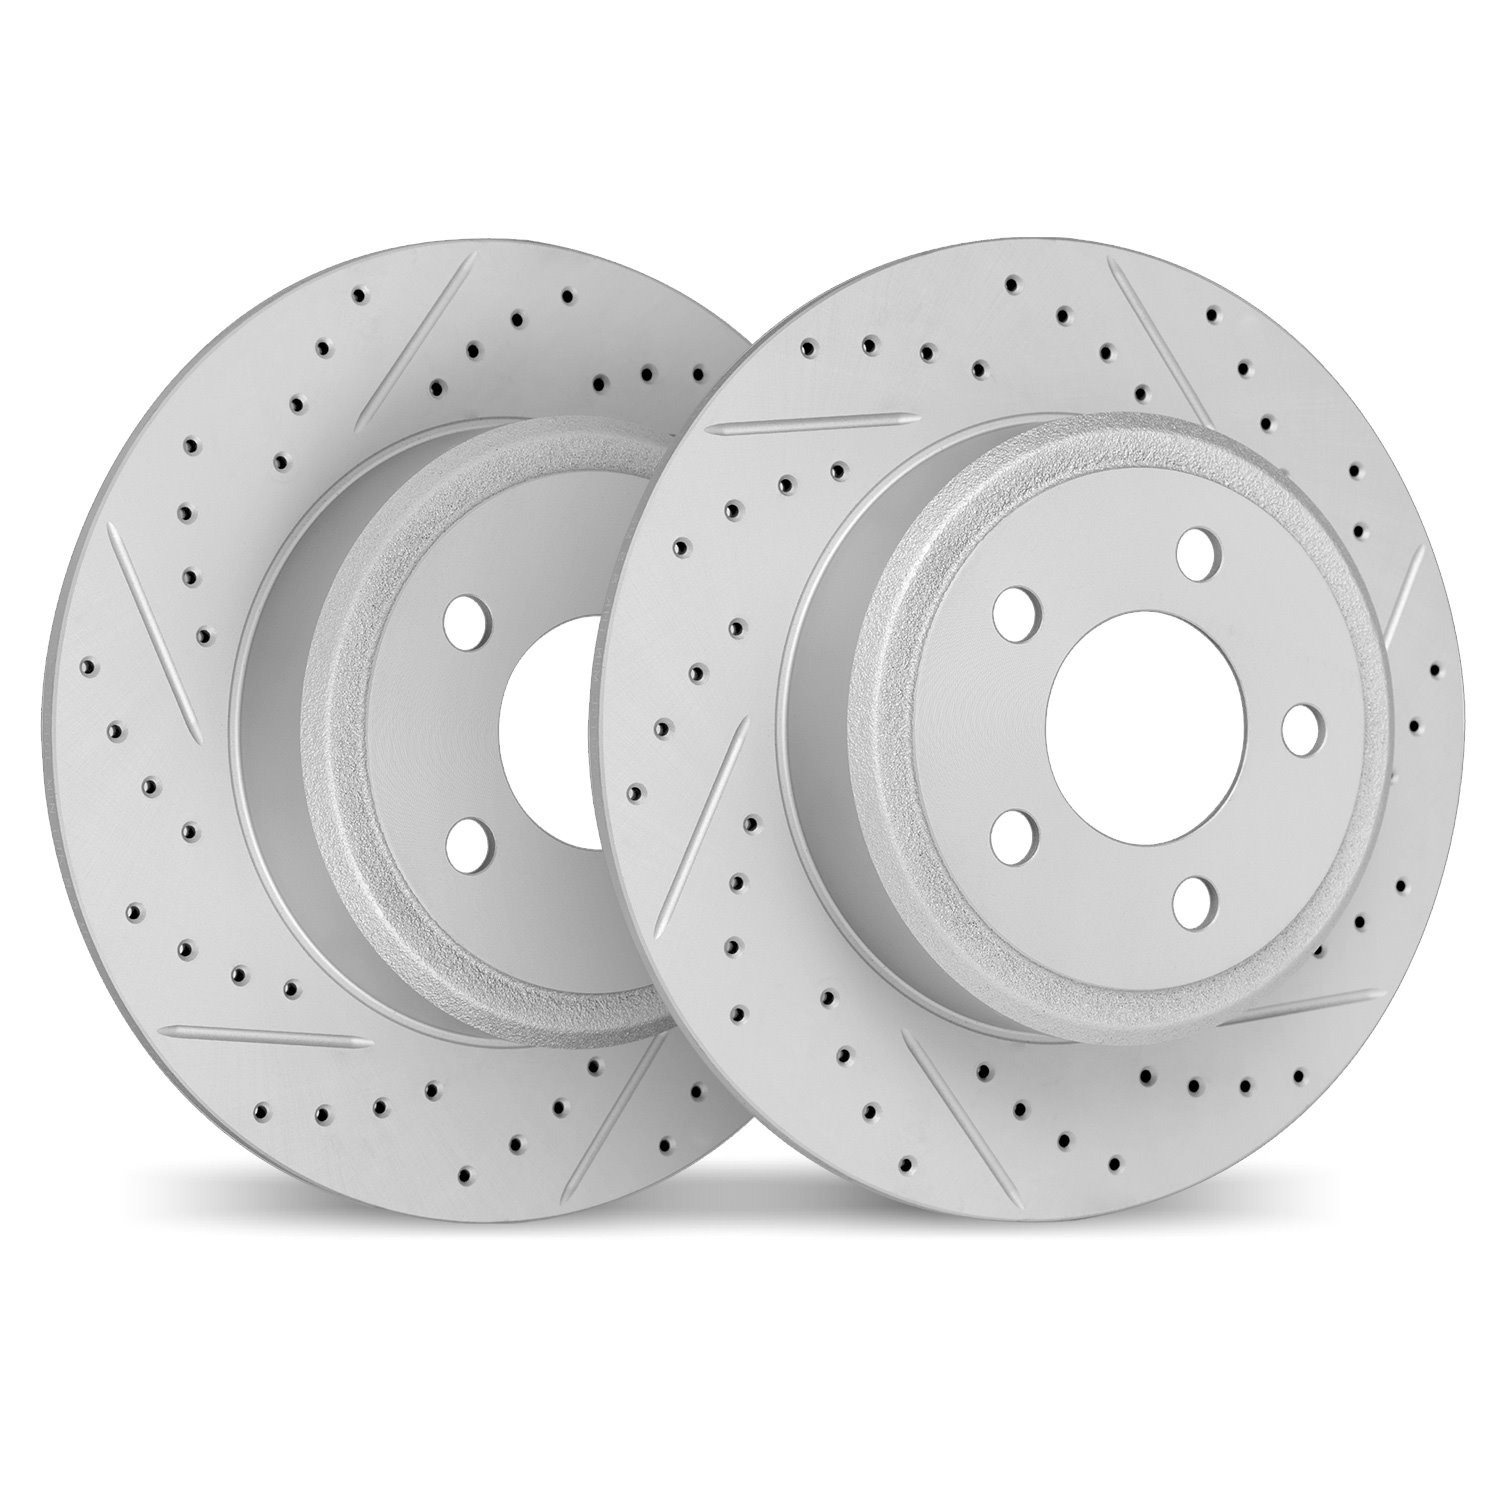 2002-76065 Geoperformance Drilled/Slotted Brake Rotors, 2004-2005 Lexus/Toyota/Scion, Position: Rear